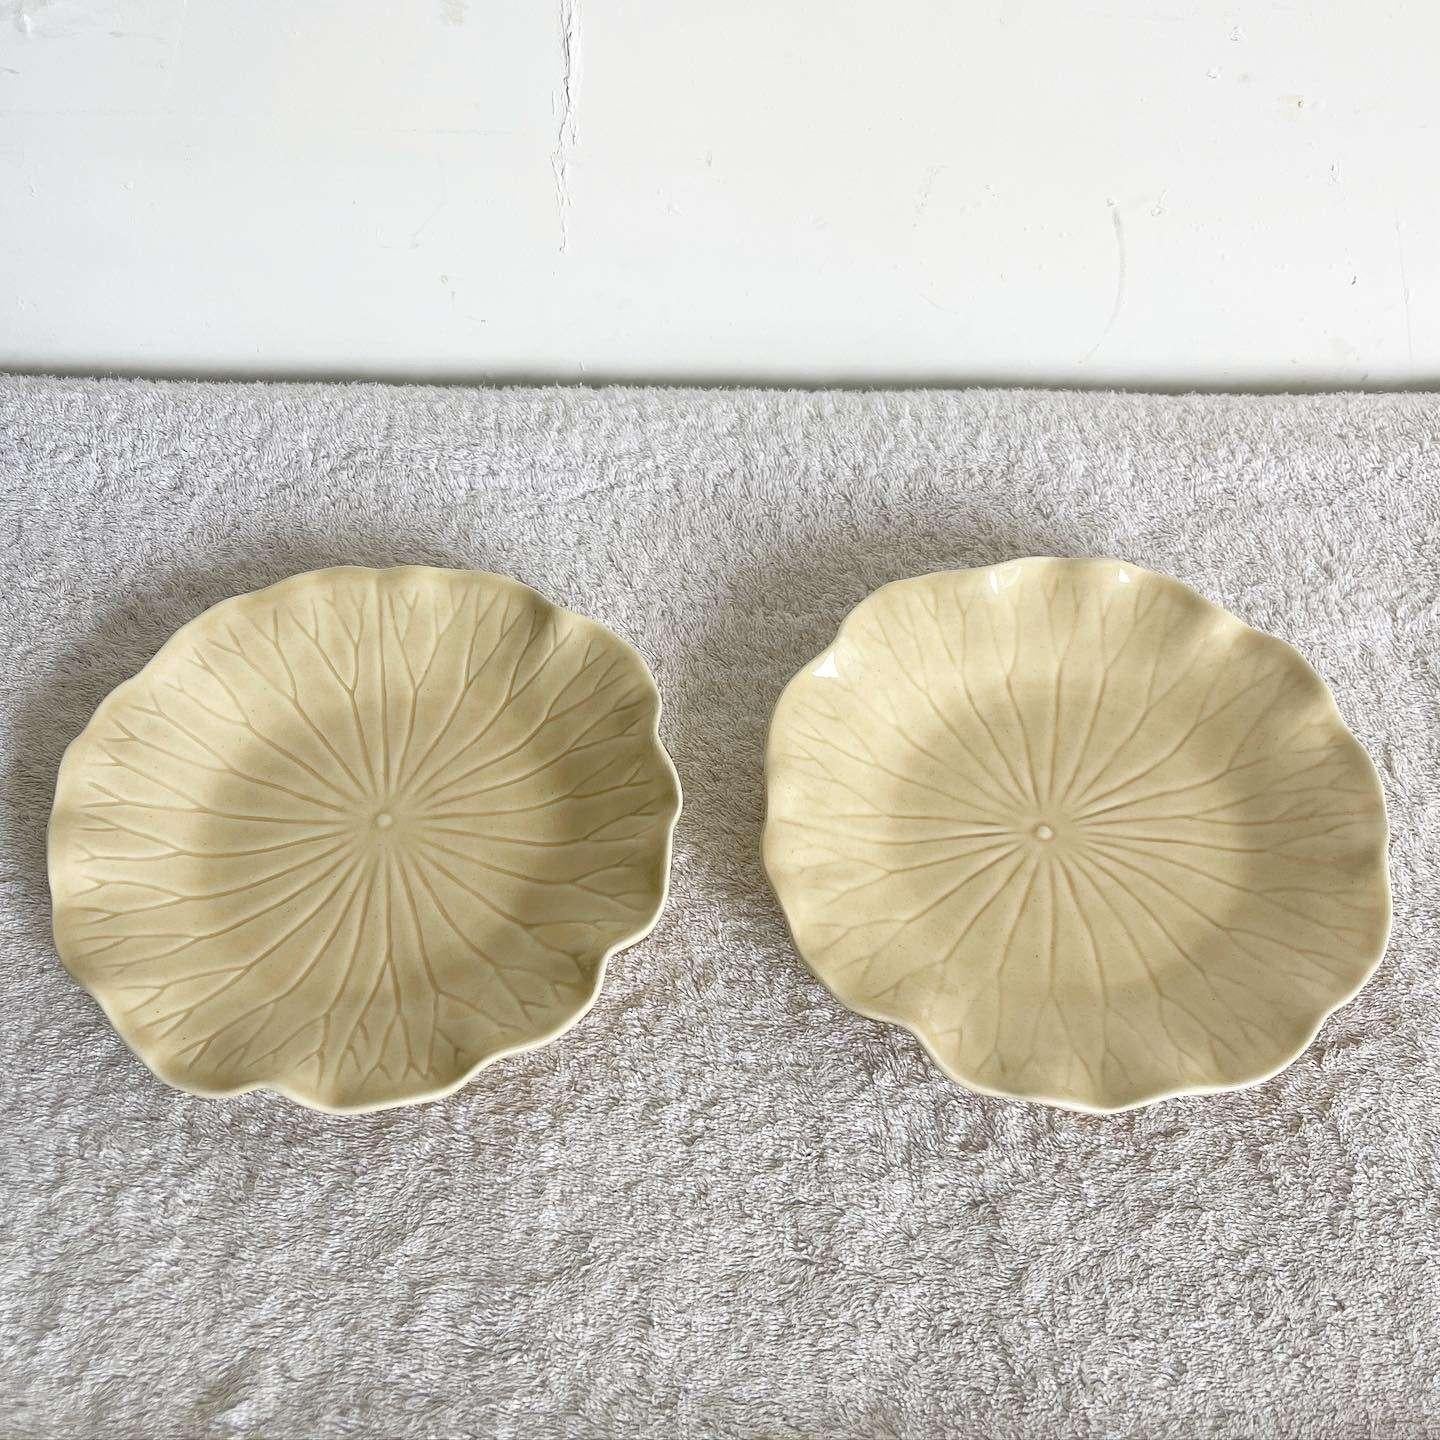 Beige Metlox Poppytrail Lotus Plate - a Pair In Good Condition For Sale In Delray Beach, FL